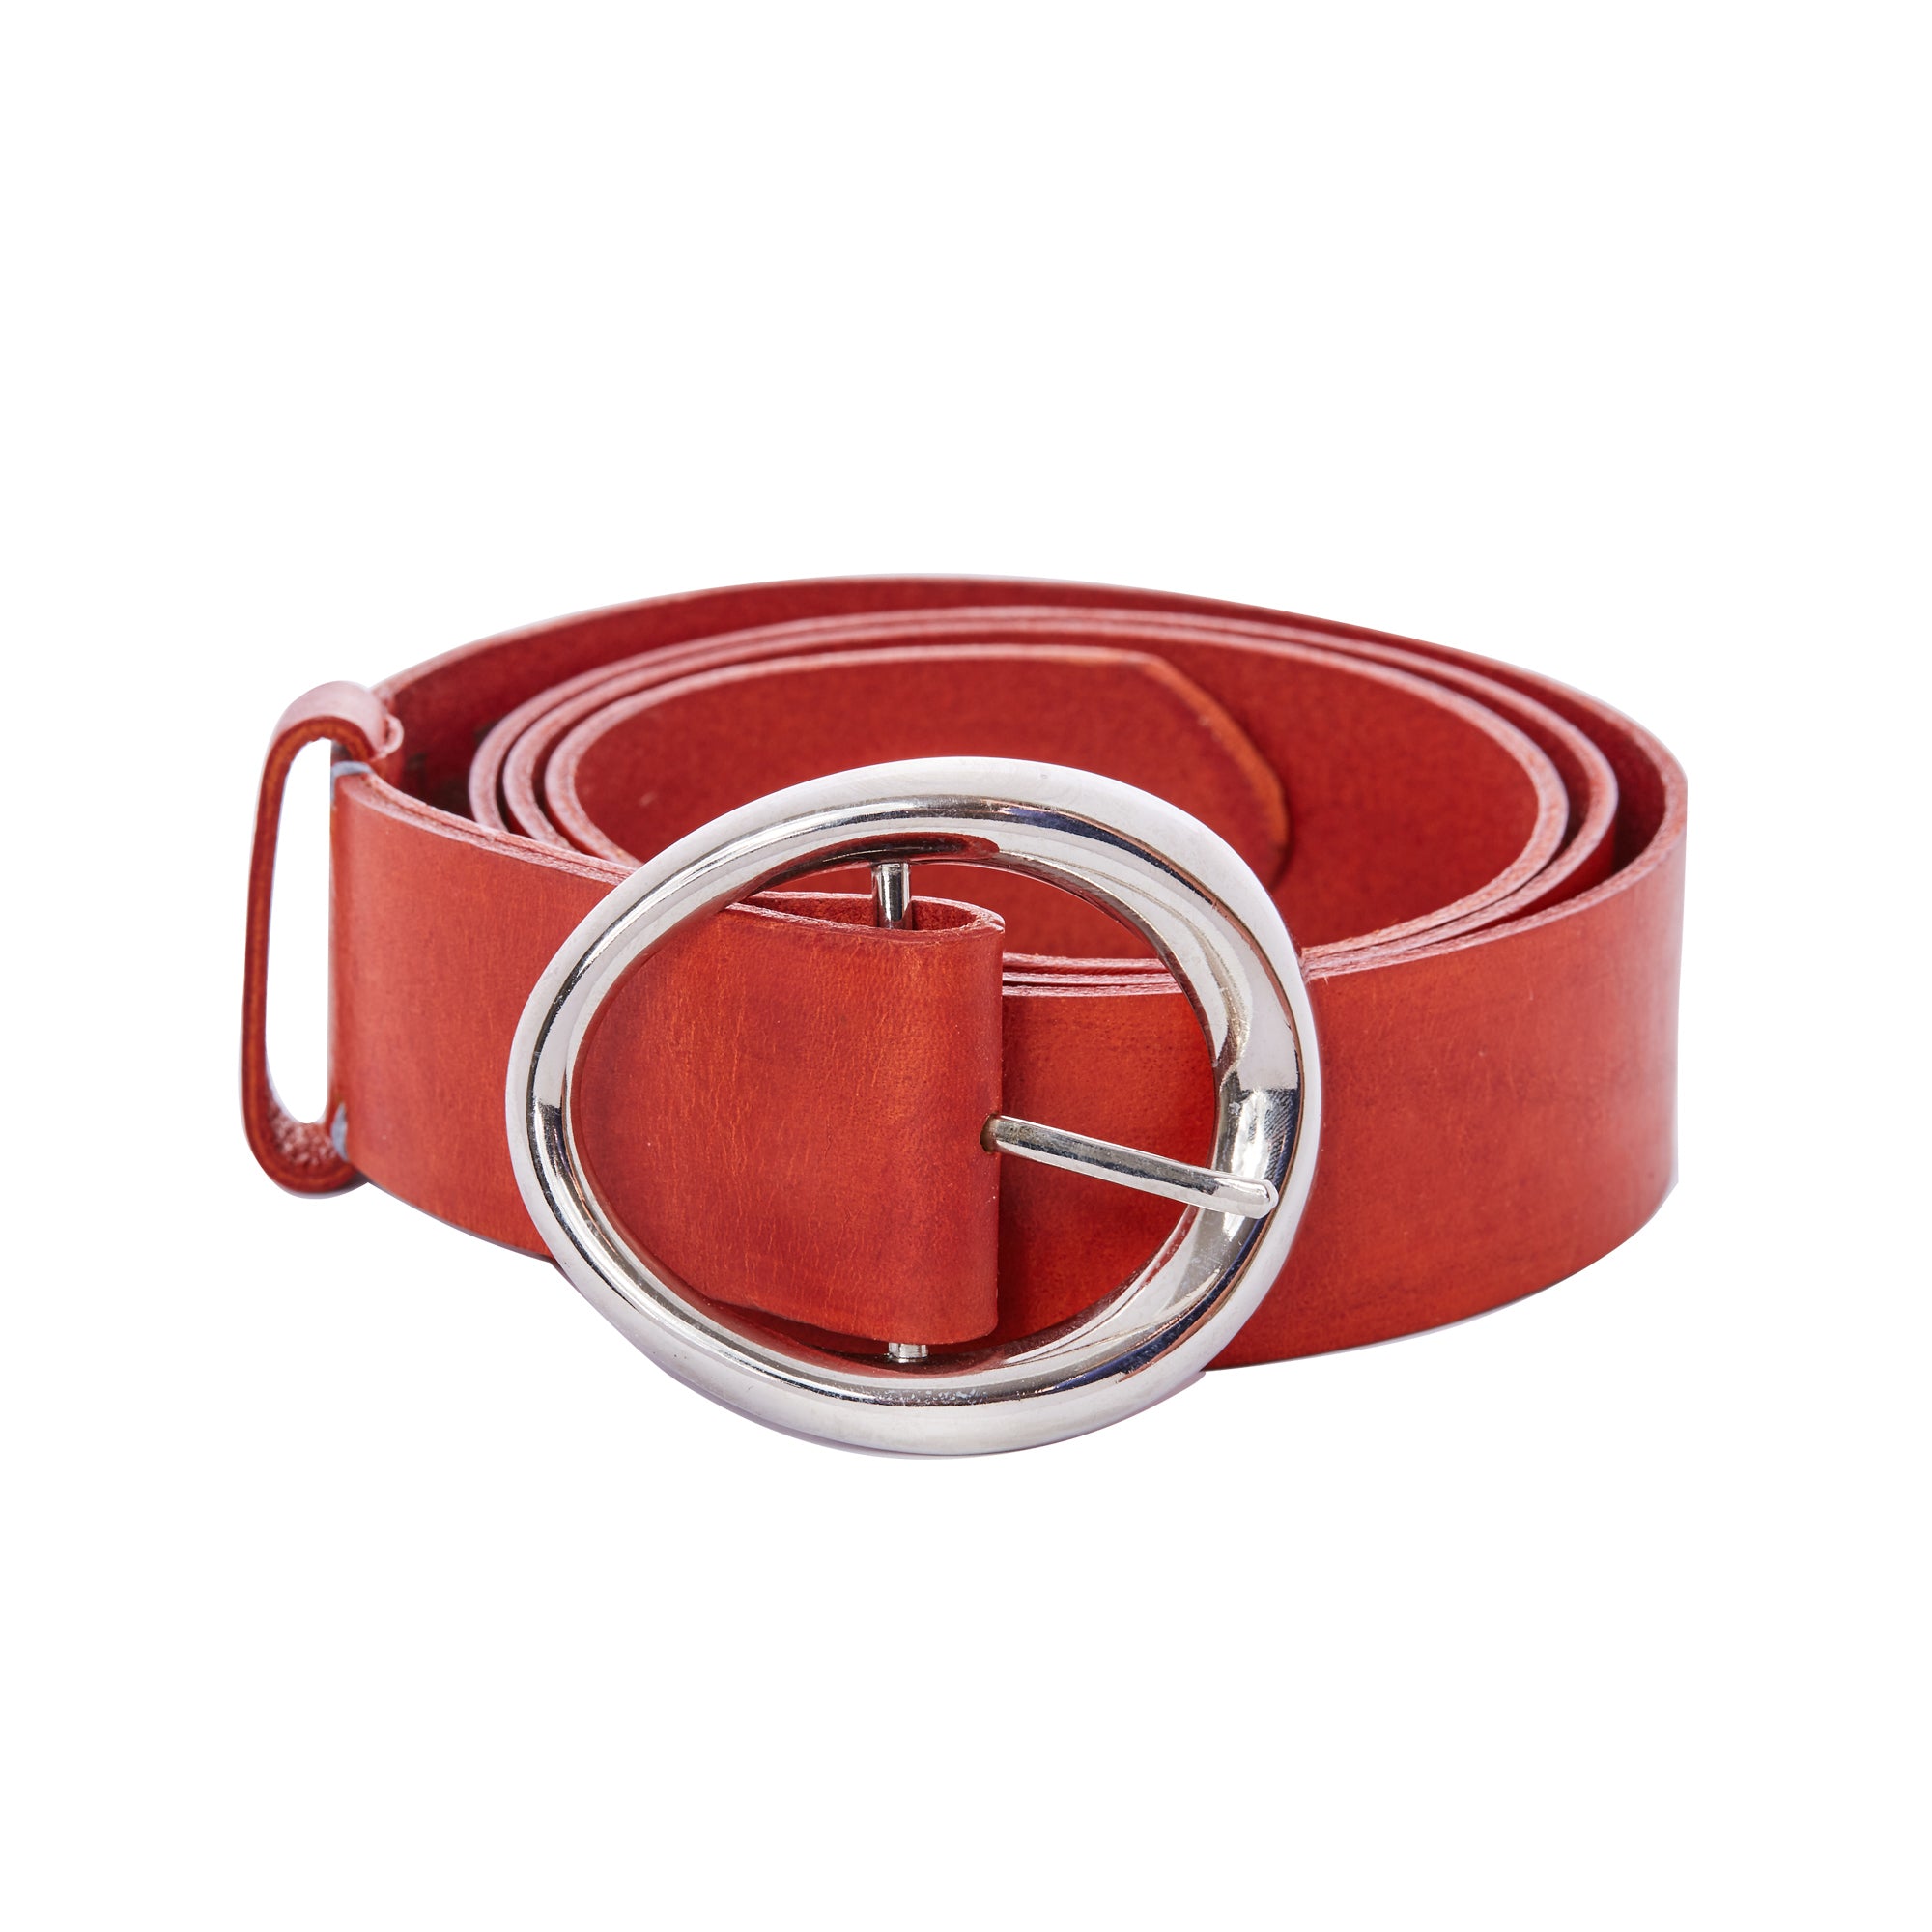 Odell 1 3/8in Belt - Available in More Colors